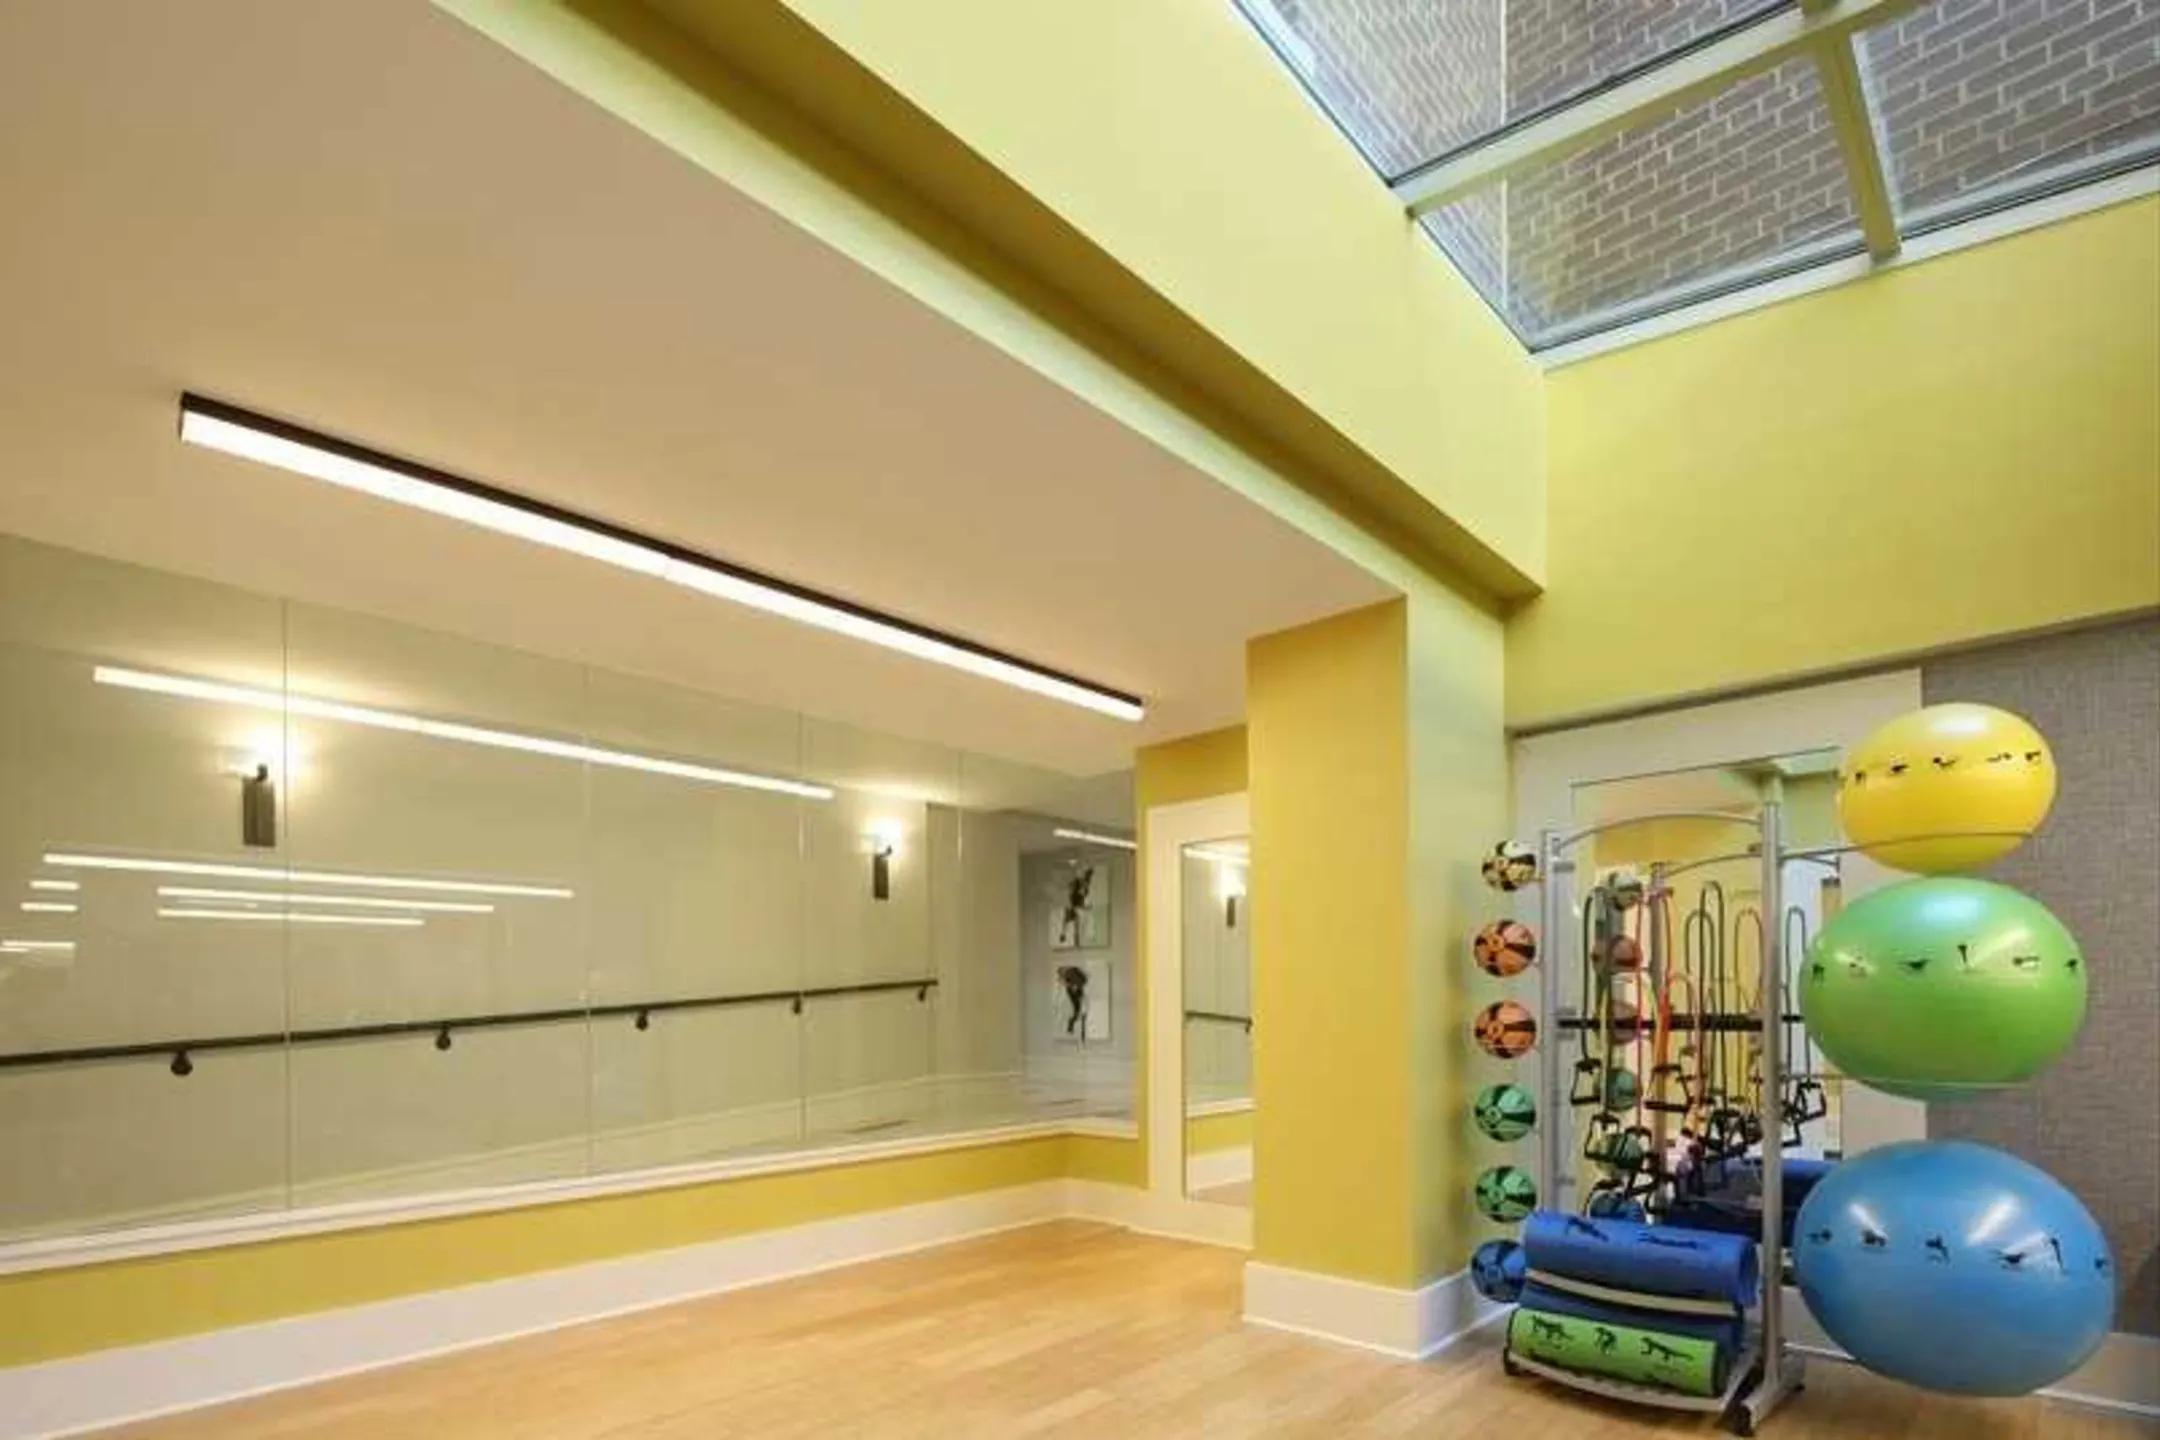 Fitness Weight Room - 700 Constitution - Washington, DC